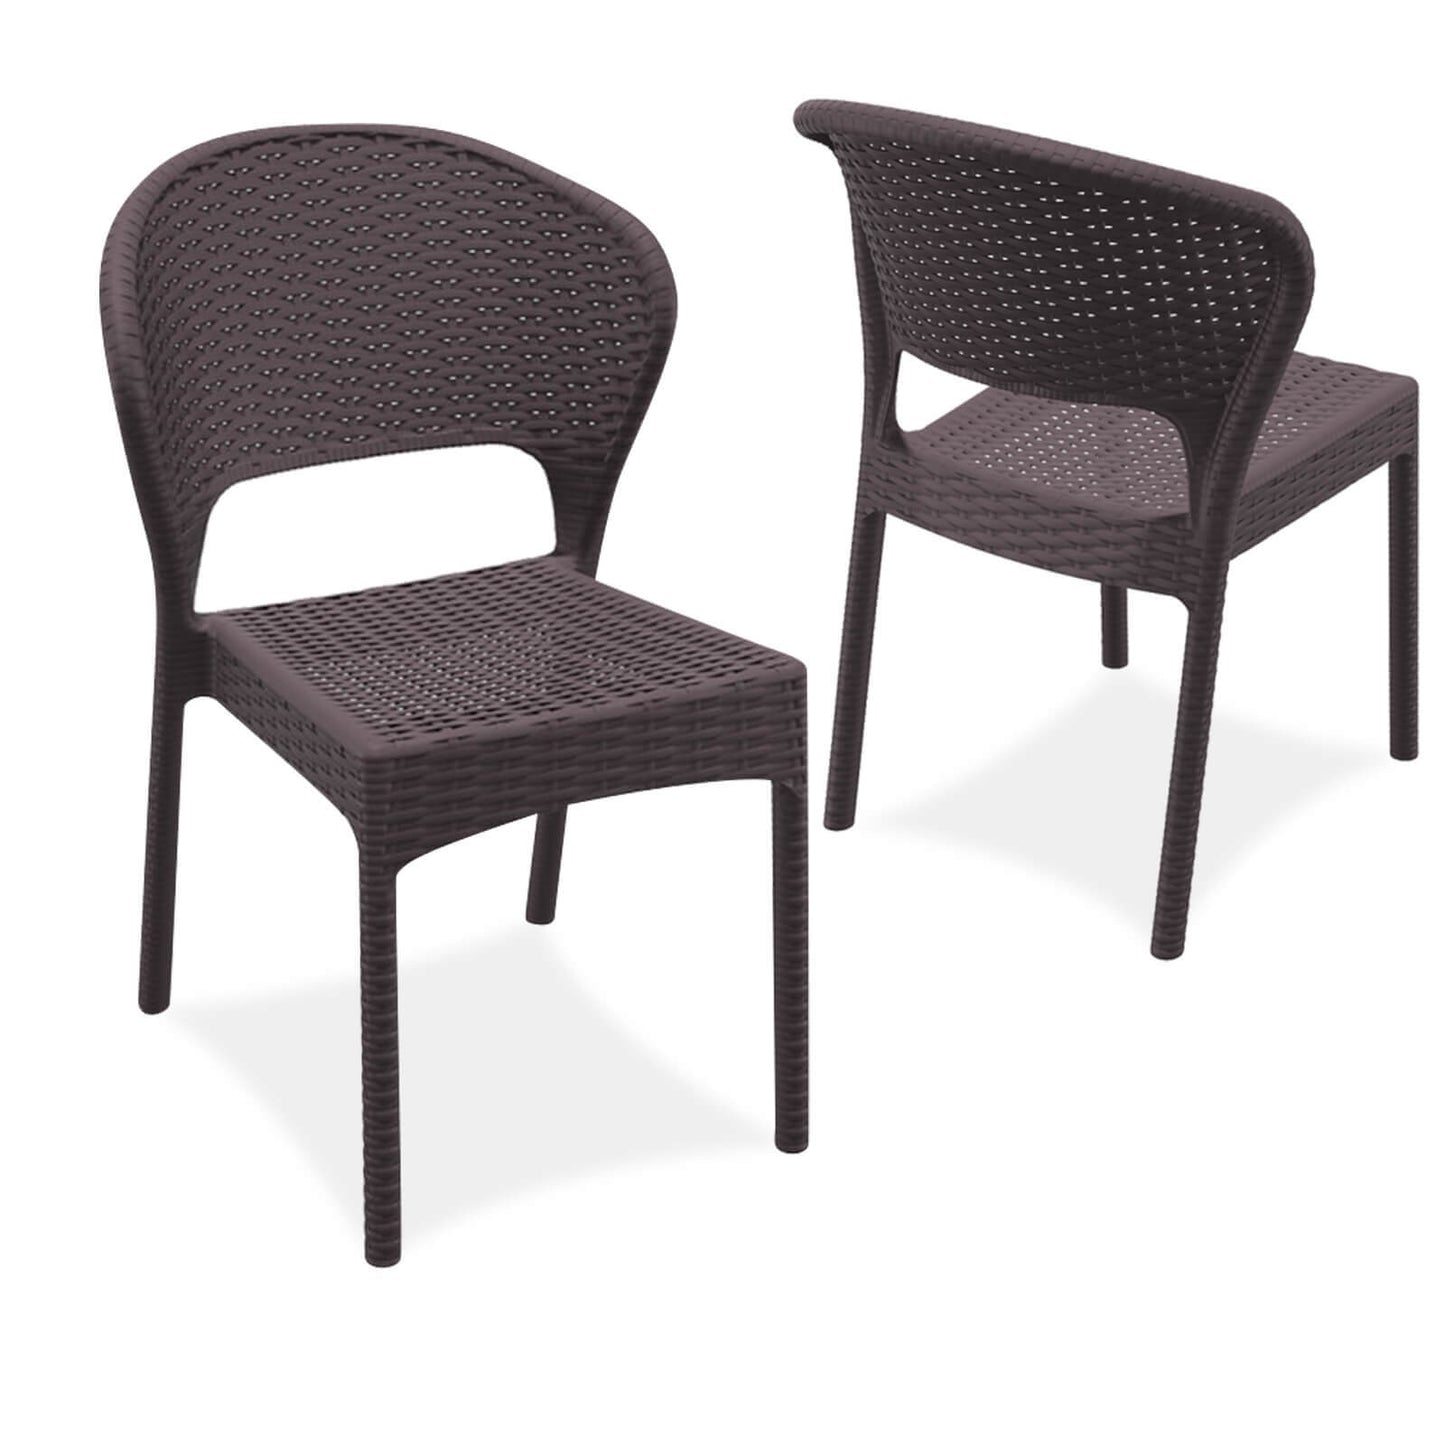 Clovelly | Coastal, Stackable, Plastic Outdoor Dining Chairs | Set Of 2 | Chocolate